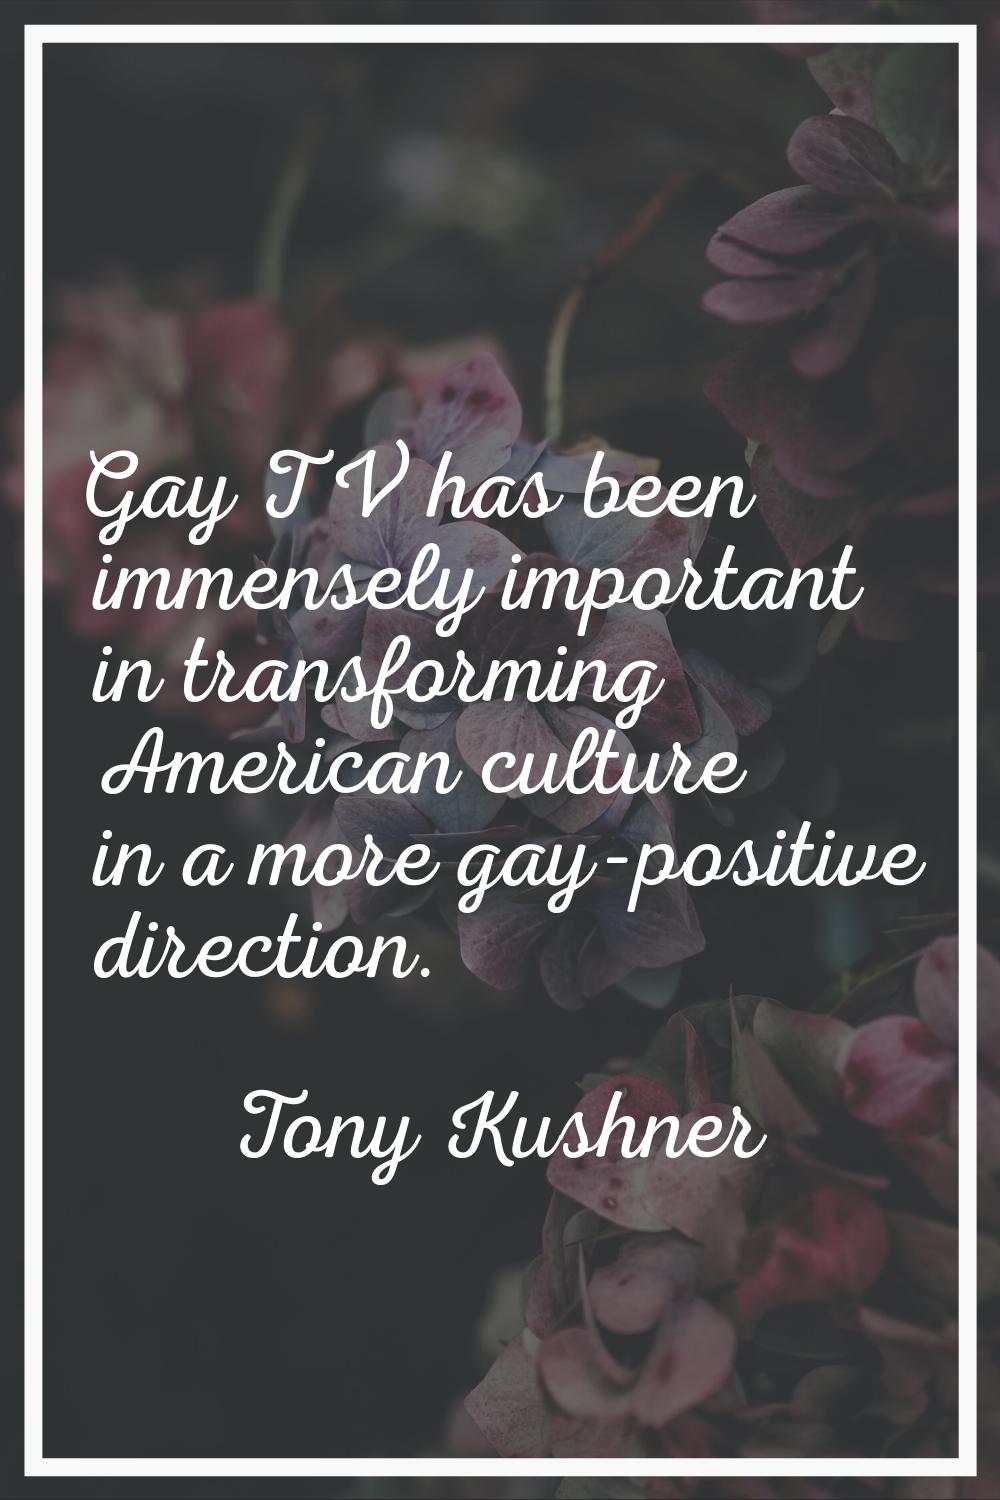 Gay TV has been immensely important in transforming American culture in a more gay-positive directi